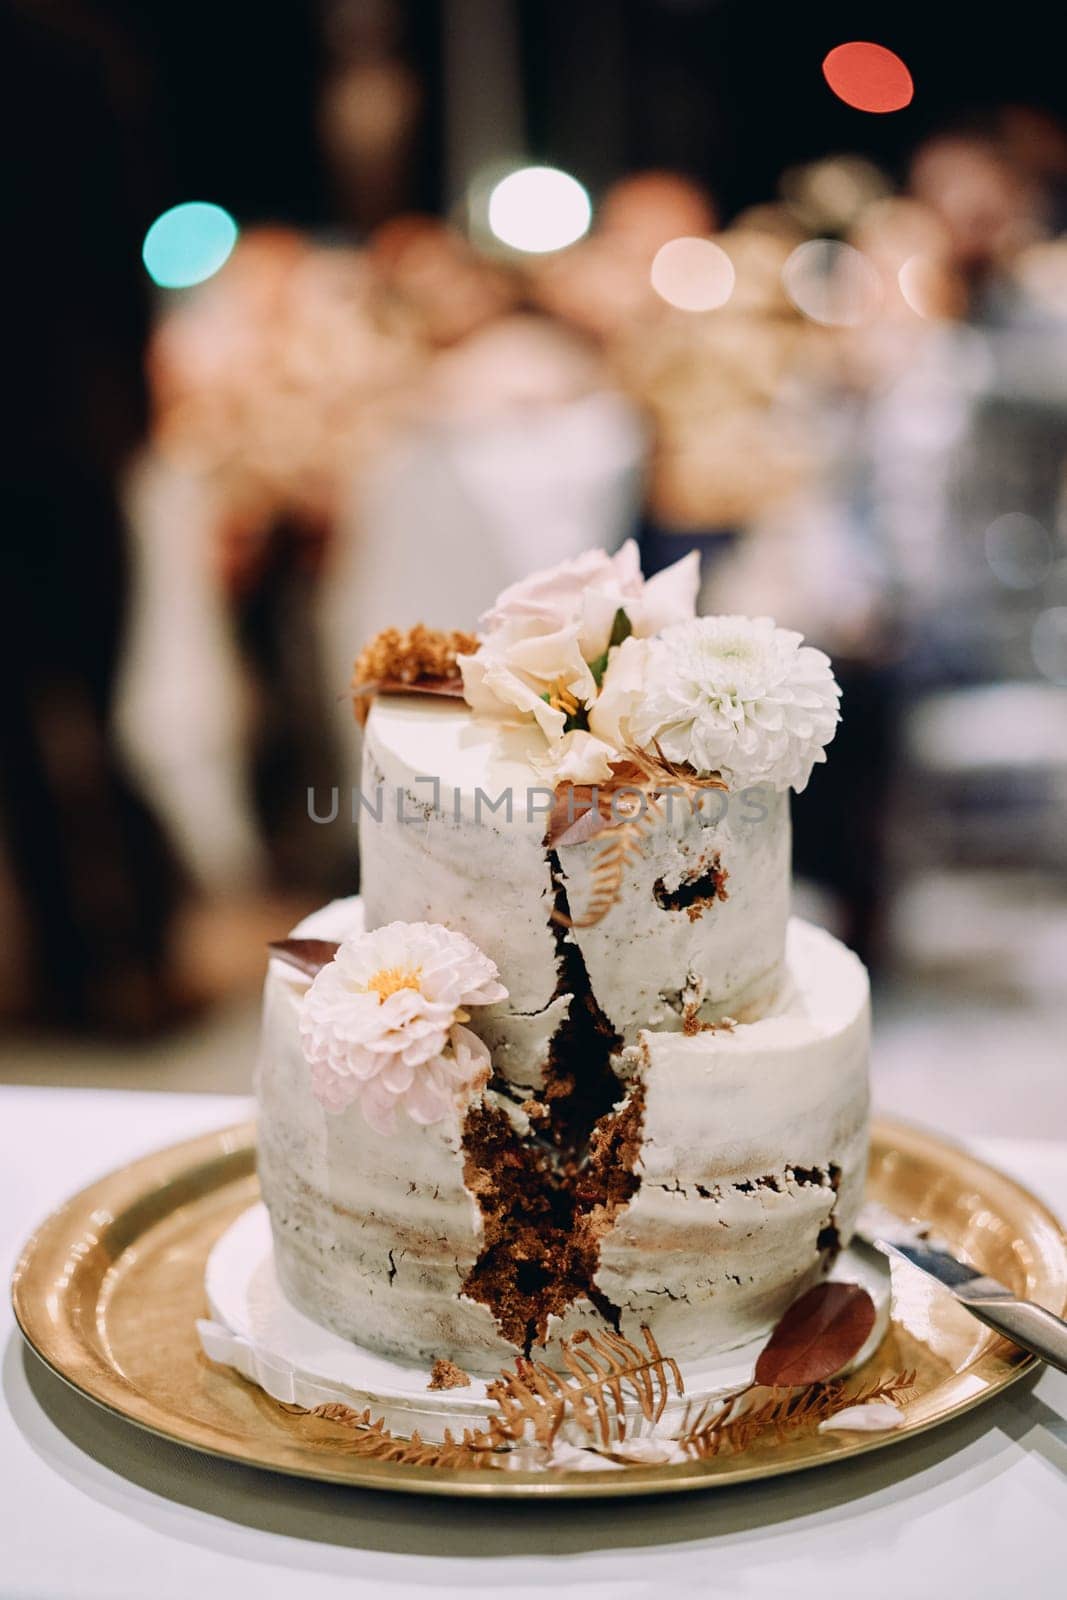 Two-tier wedding cake decorated with flowers with a cut out sector stands on a tray on the table. High quality photo